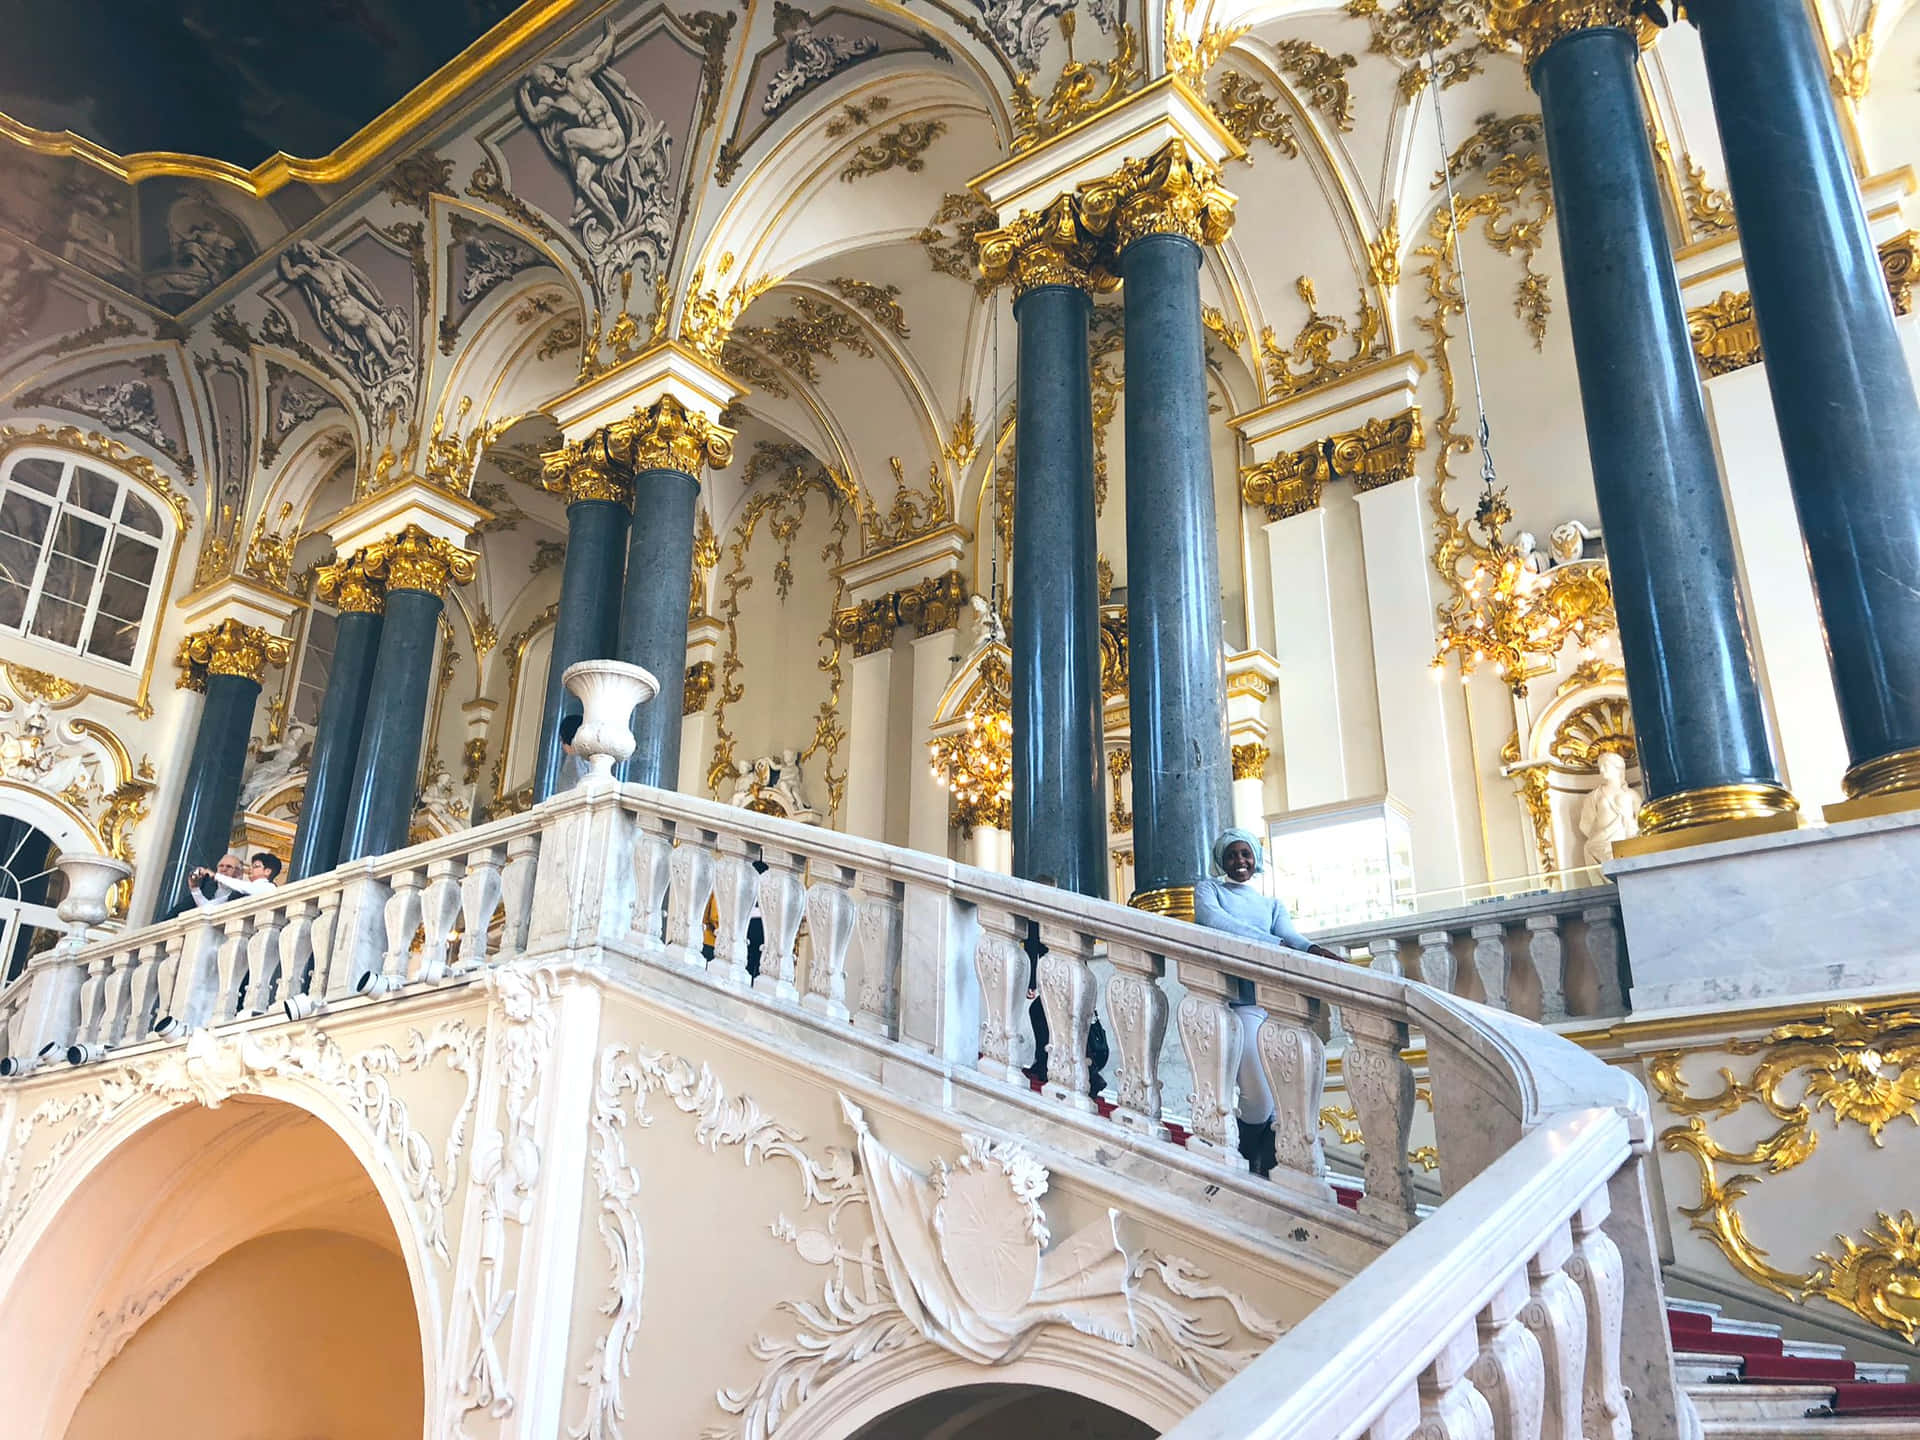 Caption: Majestic Staircase in Catherine Palace Wallpaper